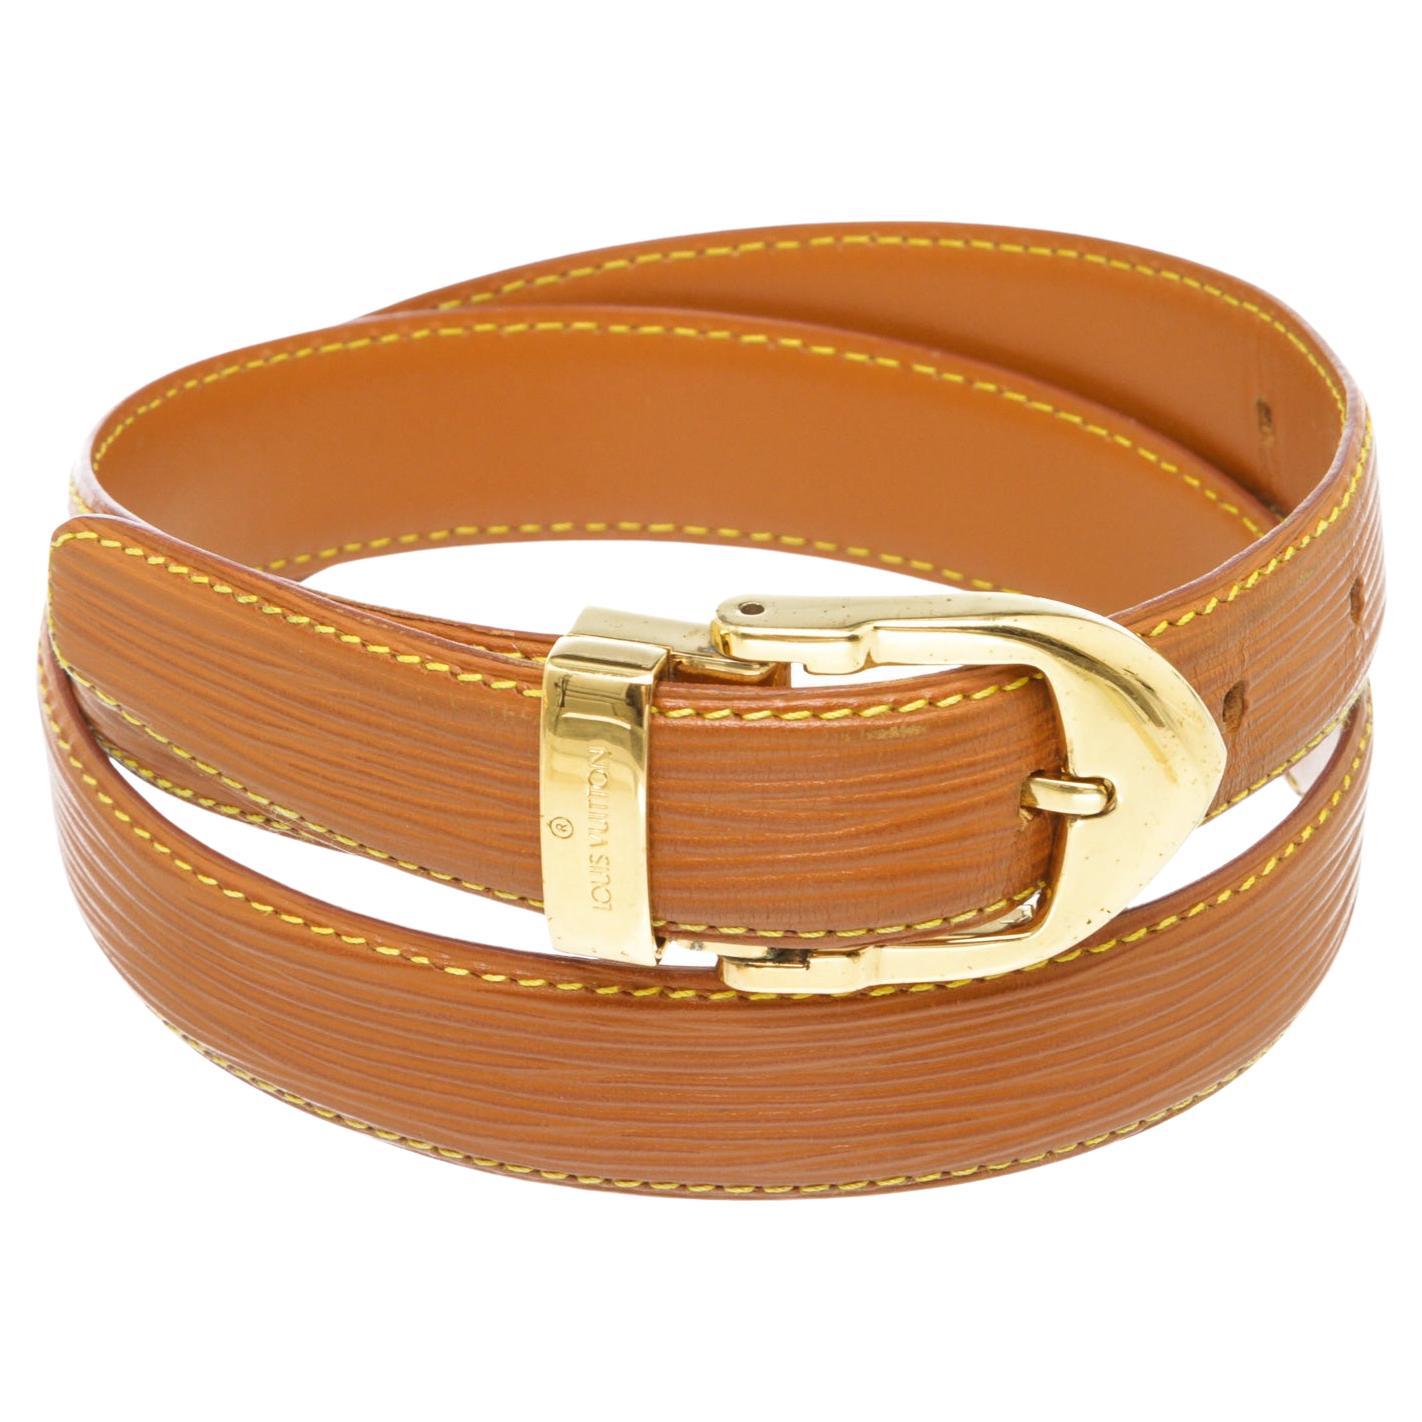 Brown Epi leather Louis Vuitton Epi Skinny Classique belt with gold-tone buckle  For Sale